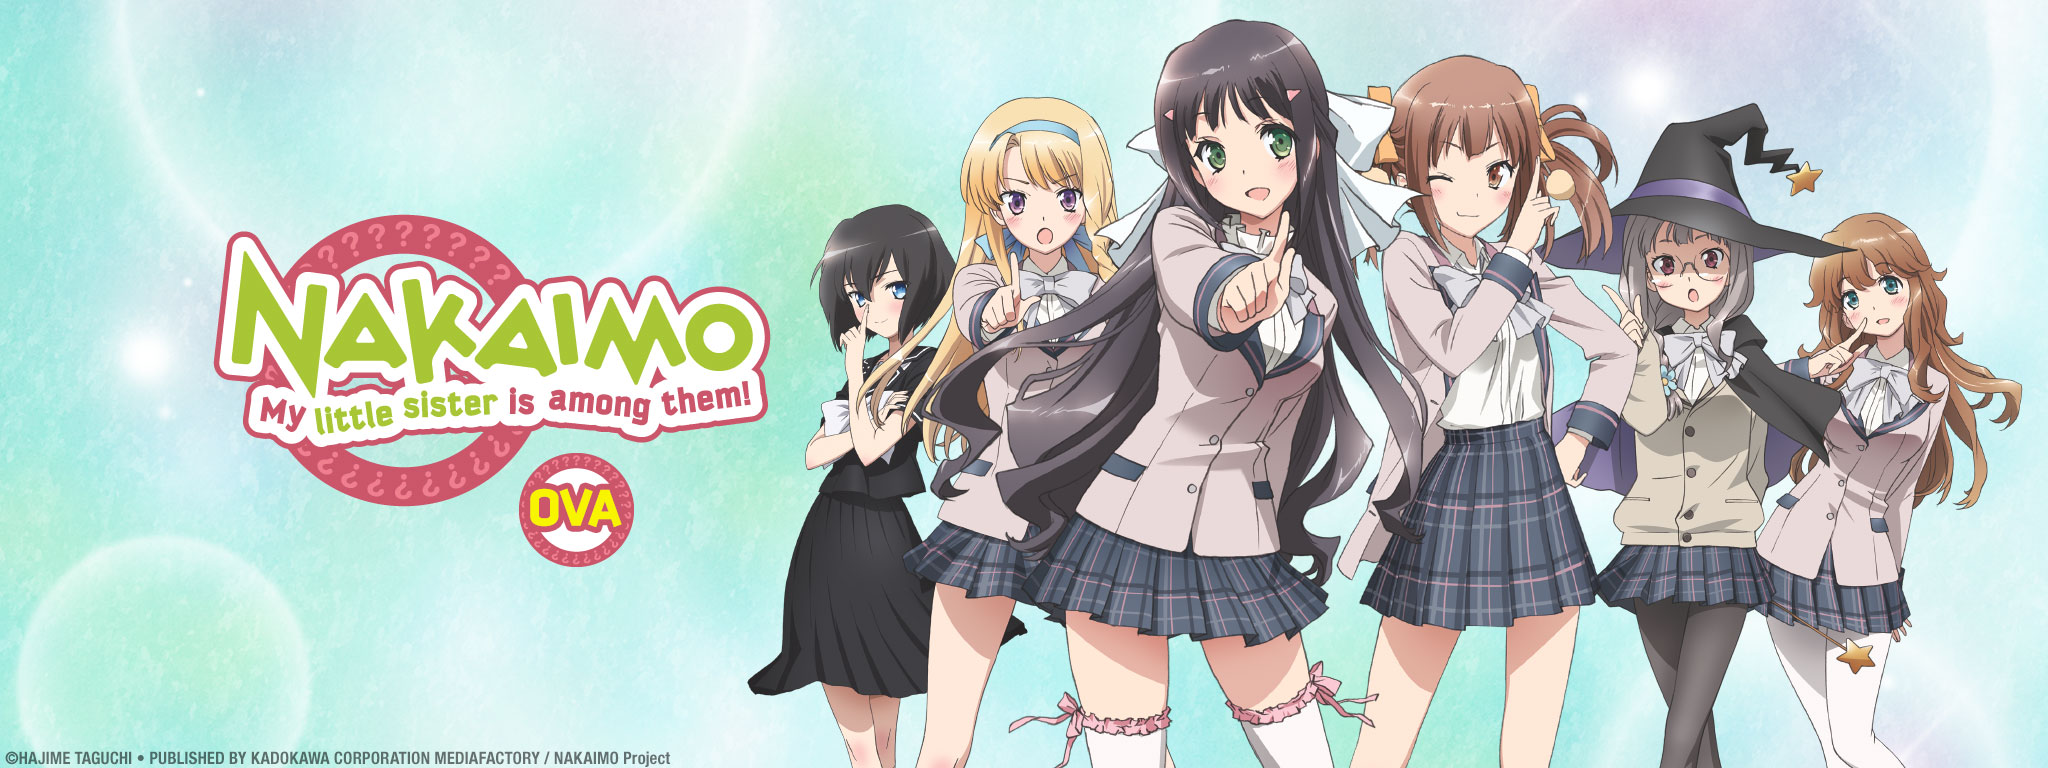 Title Art for NAKAIMO ~ My Little Sister is Among Them! OVA